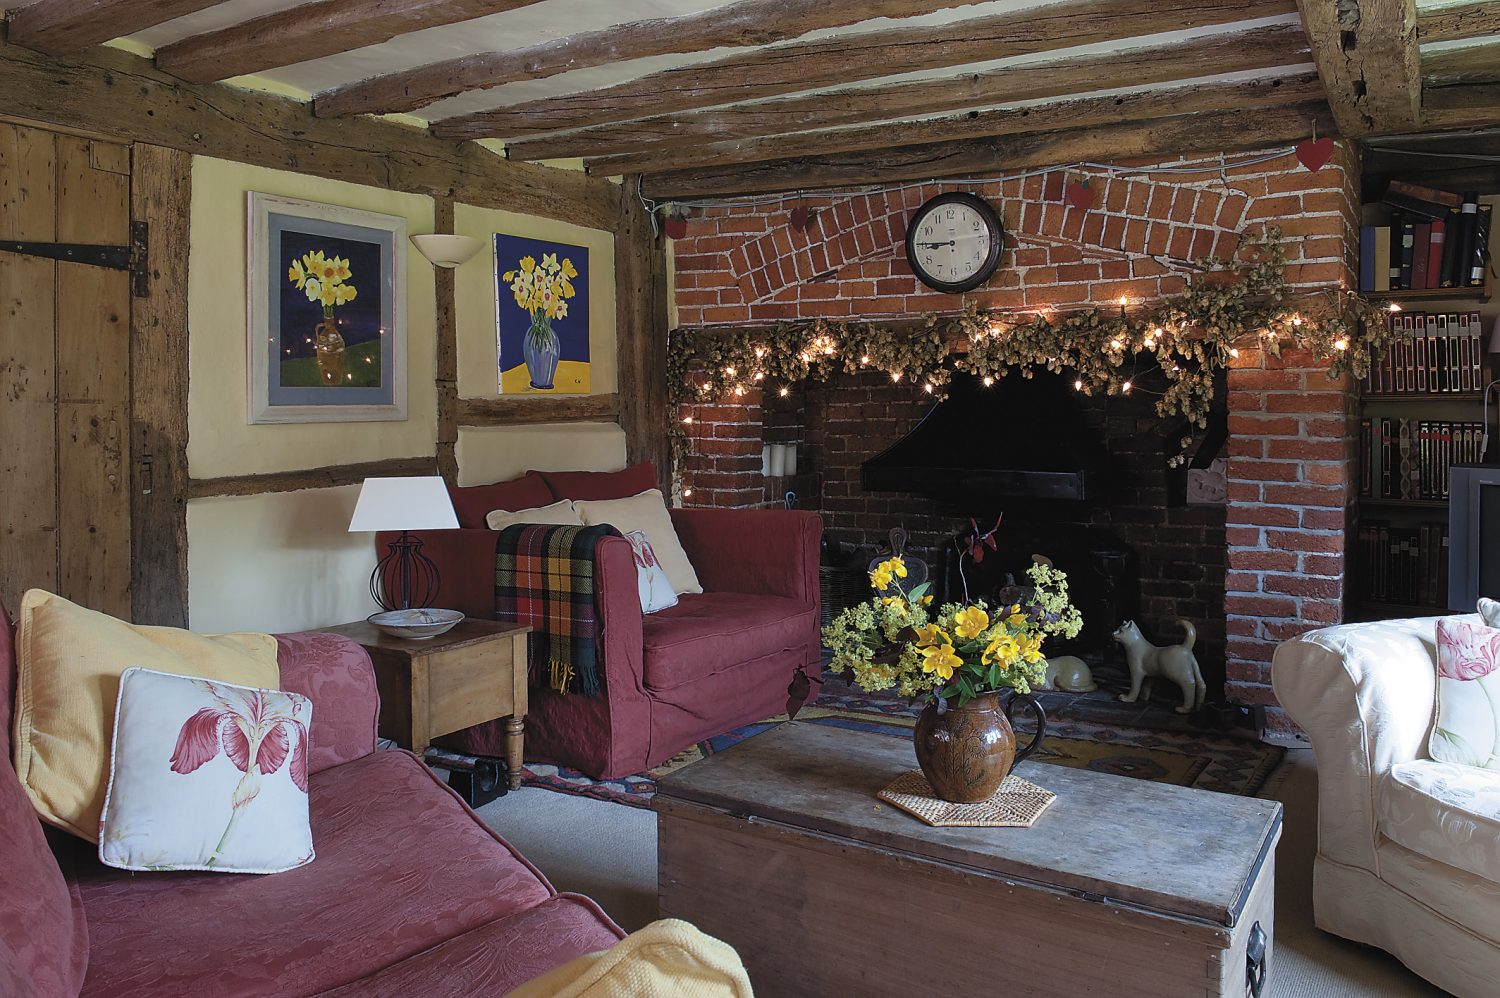 the inglenook is very much the centre of the home and is used in winter. On the wall, left, are Christine and Barry’s paintings of daffodils